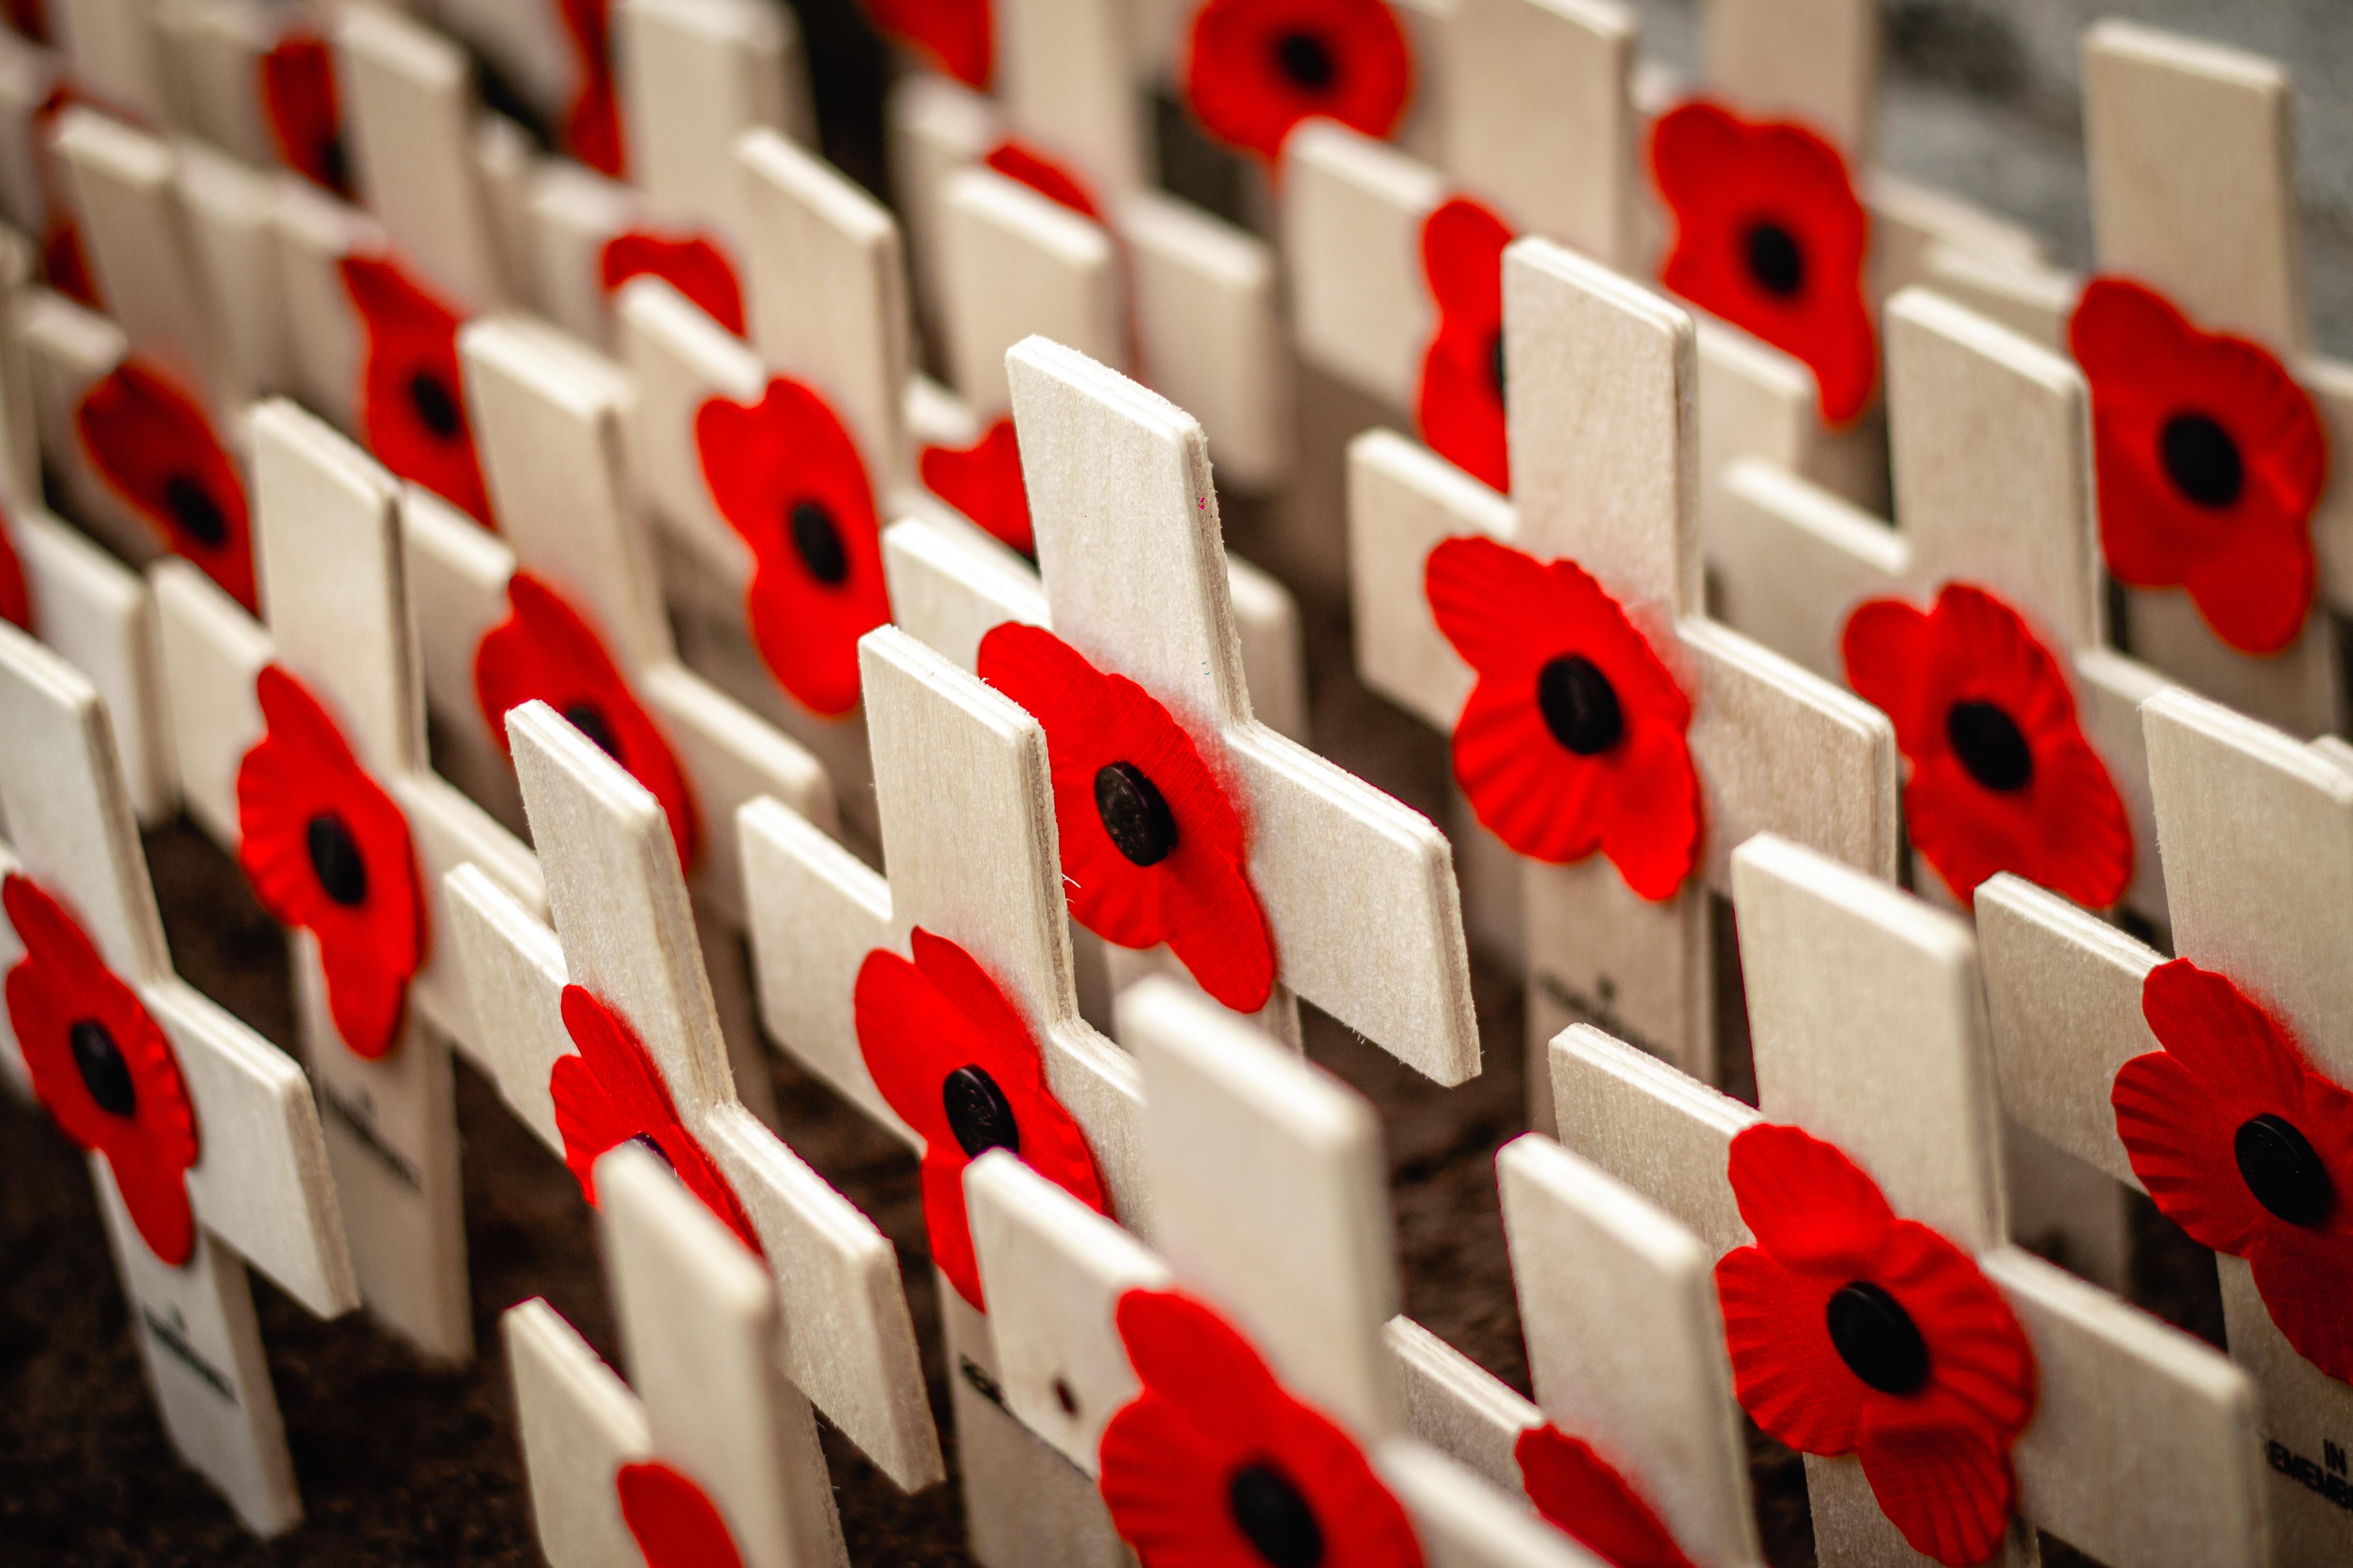 A sequence of red poppies on crosses